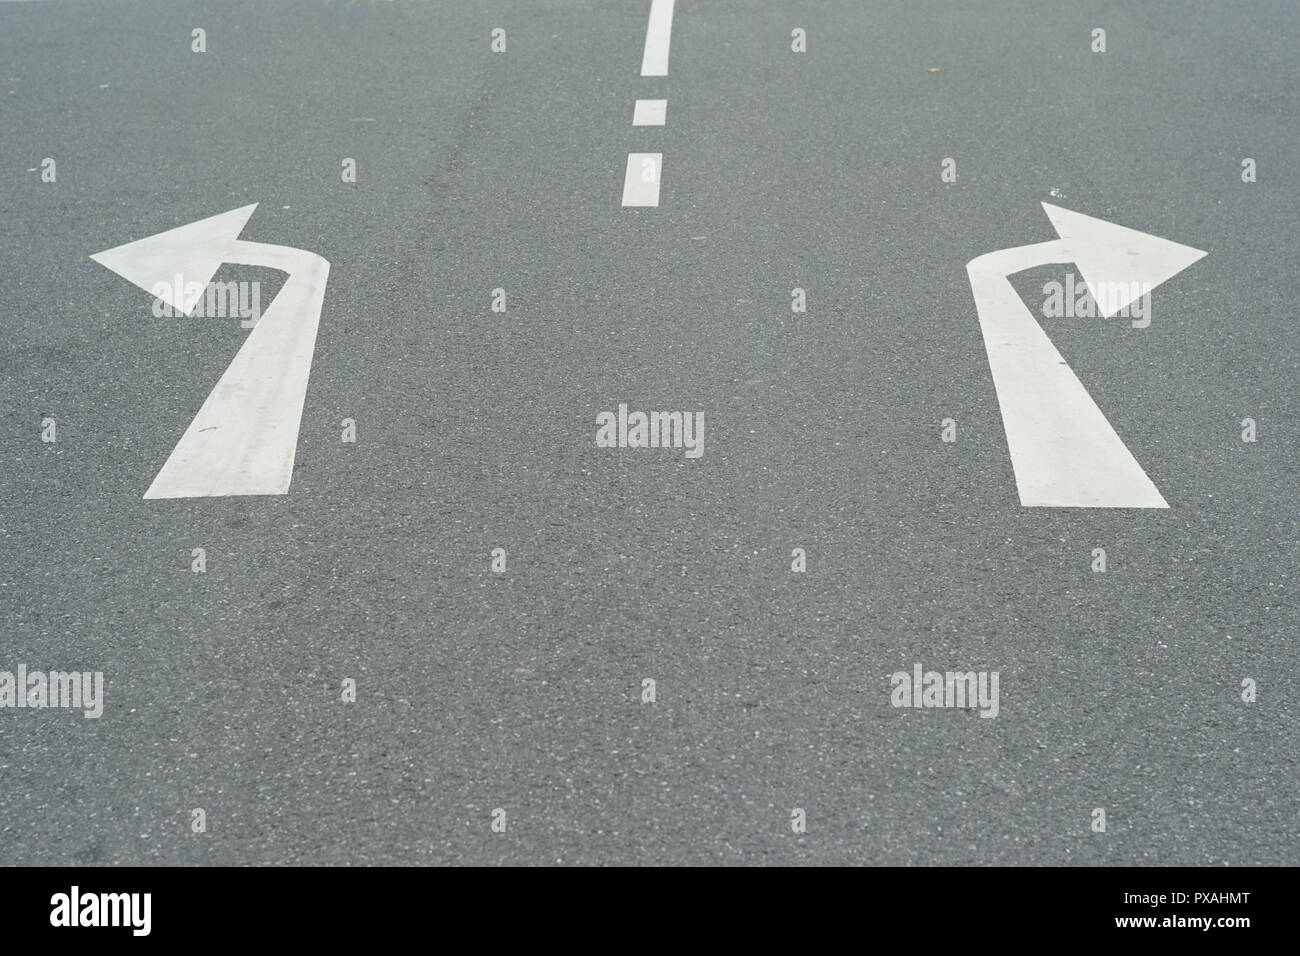 Arrows to the Right and Left on an Asphalt Road - A Concept for Decisions - Turning Left or Right Stock Photo